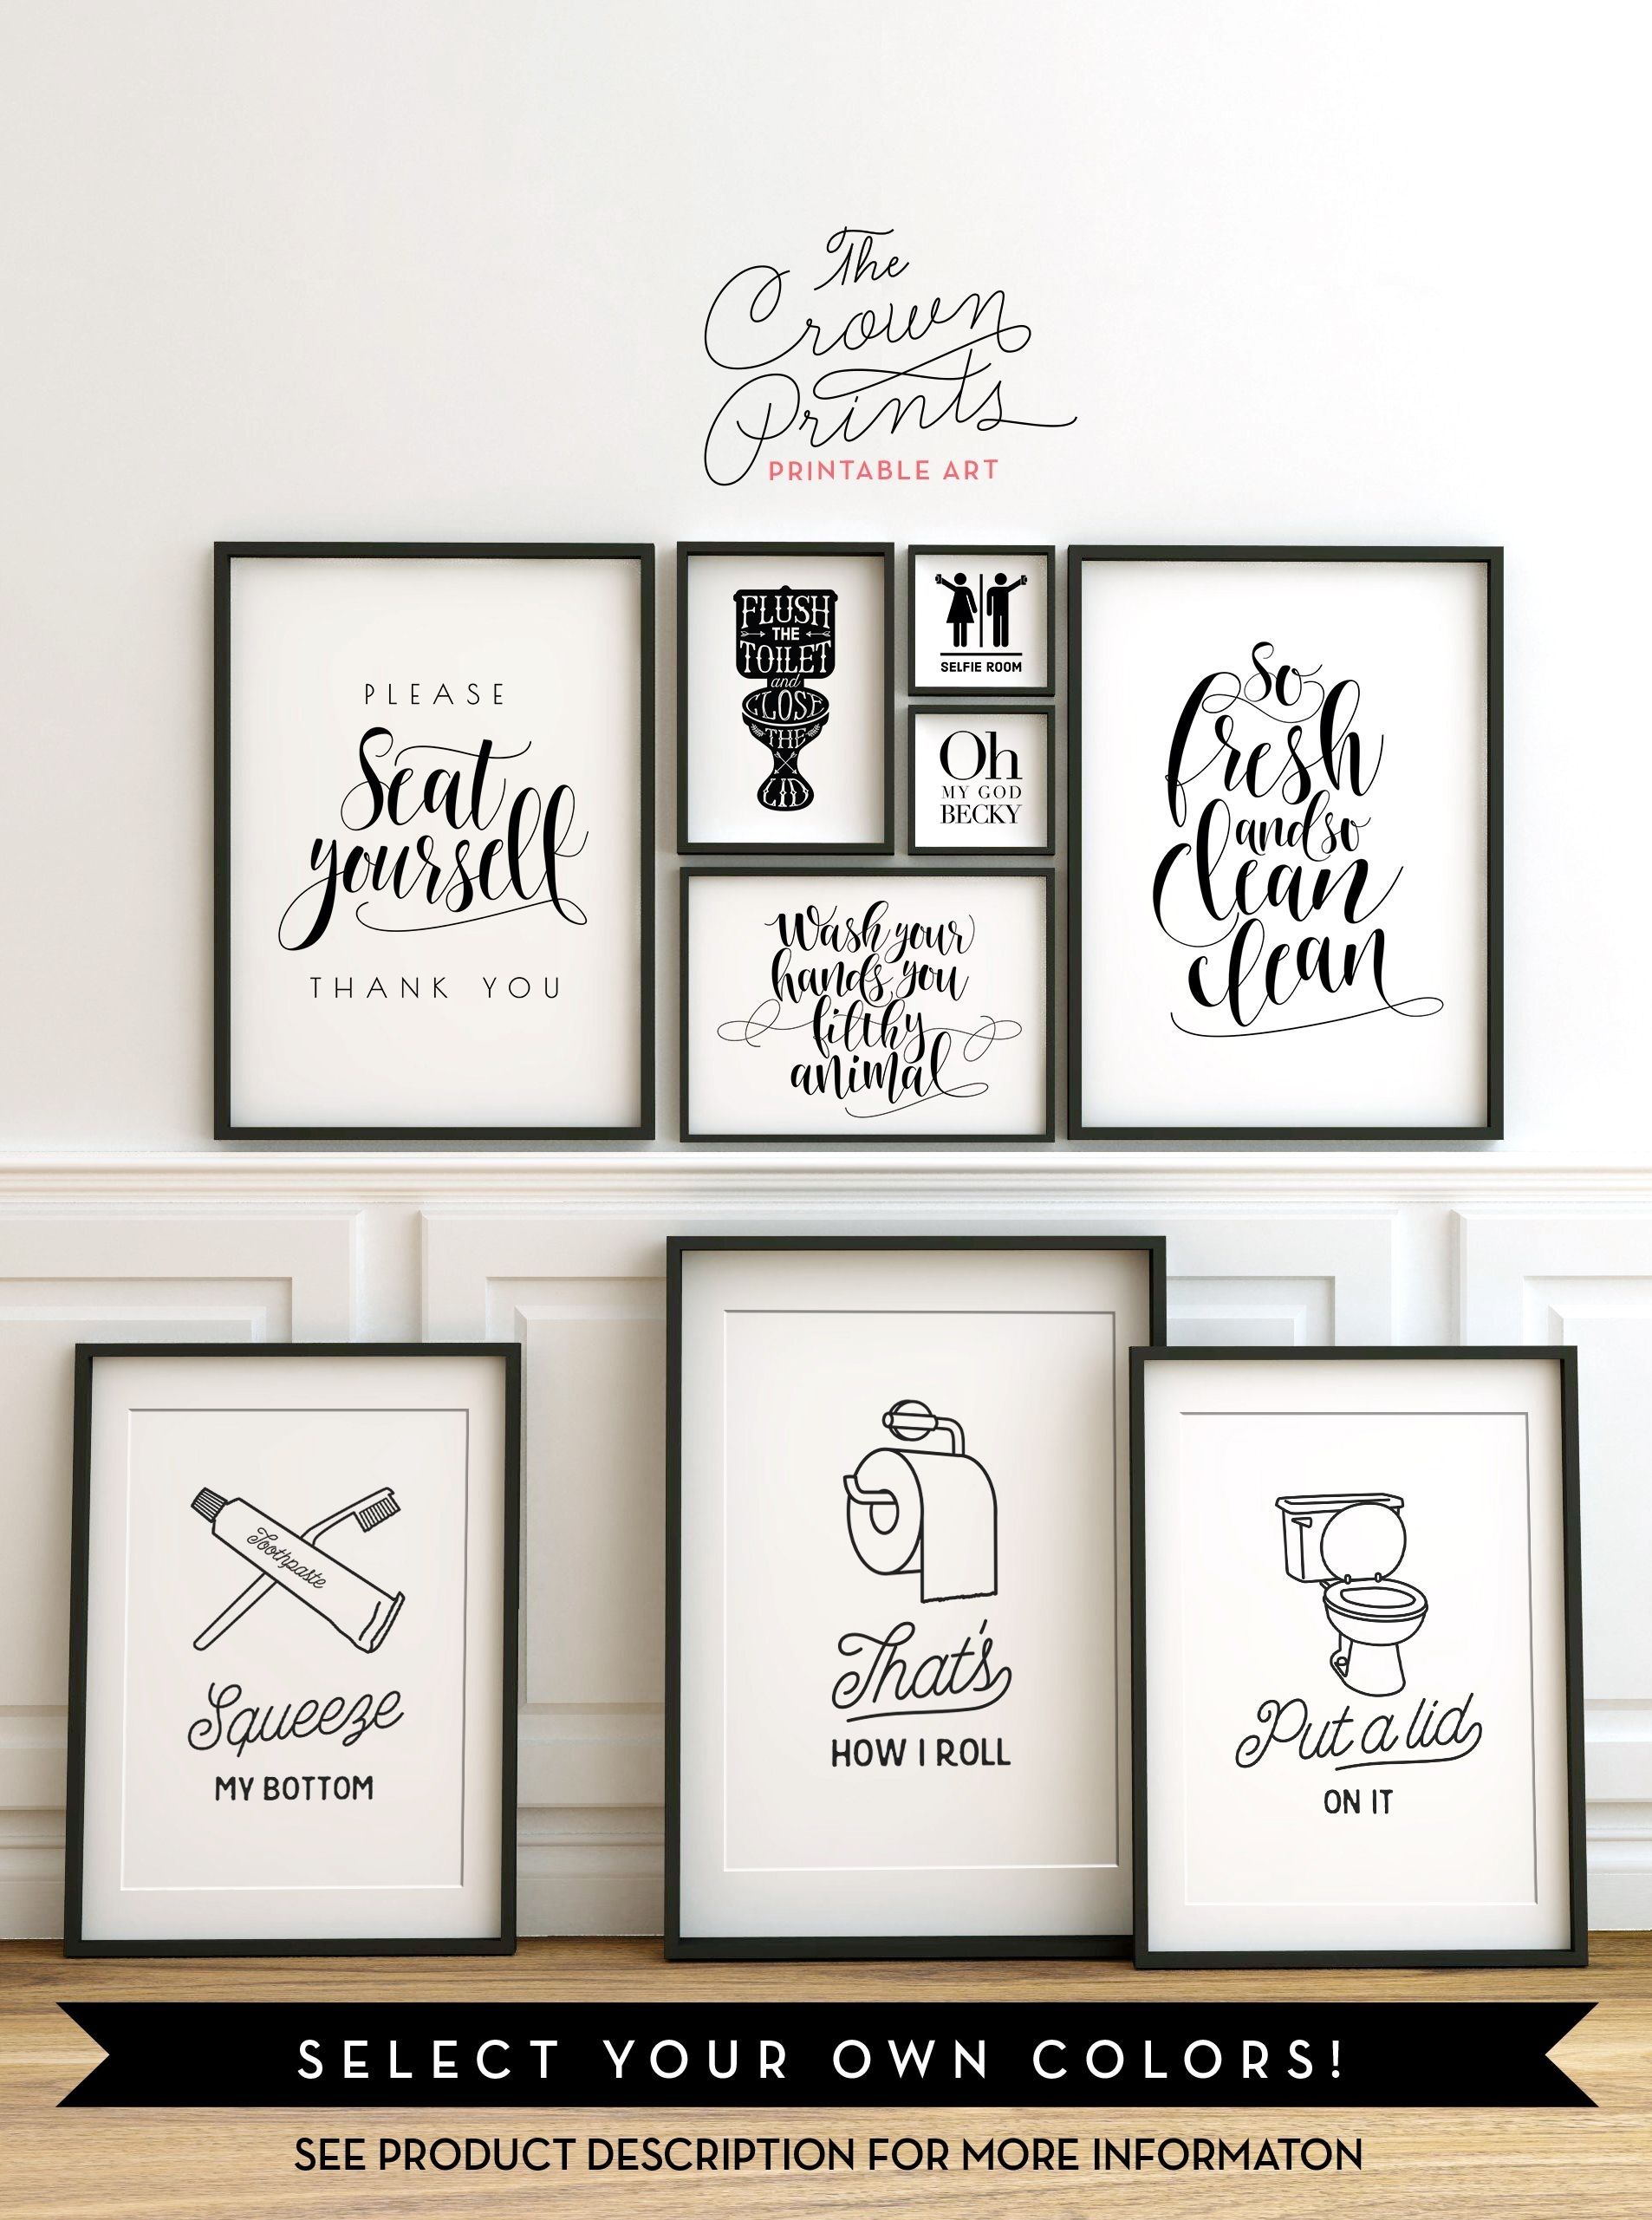 Printable Bathroom Wall Art From The Crown Prints On Etsy – Lots Of Throughout Bathroom Wall Art Decors (View 1 of 20)